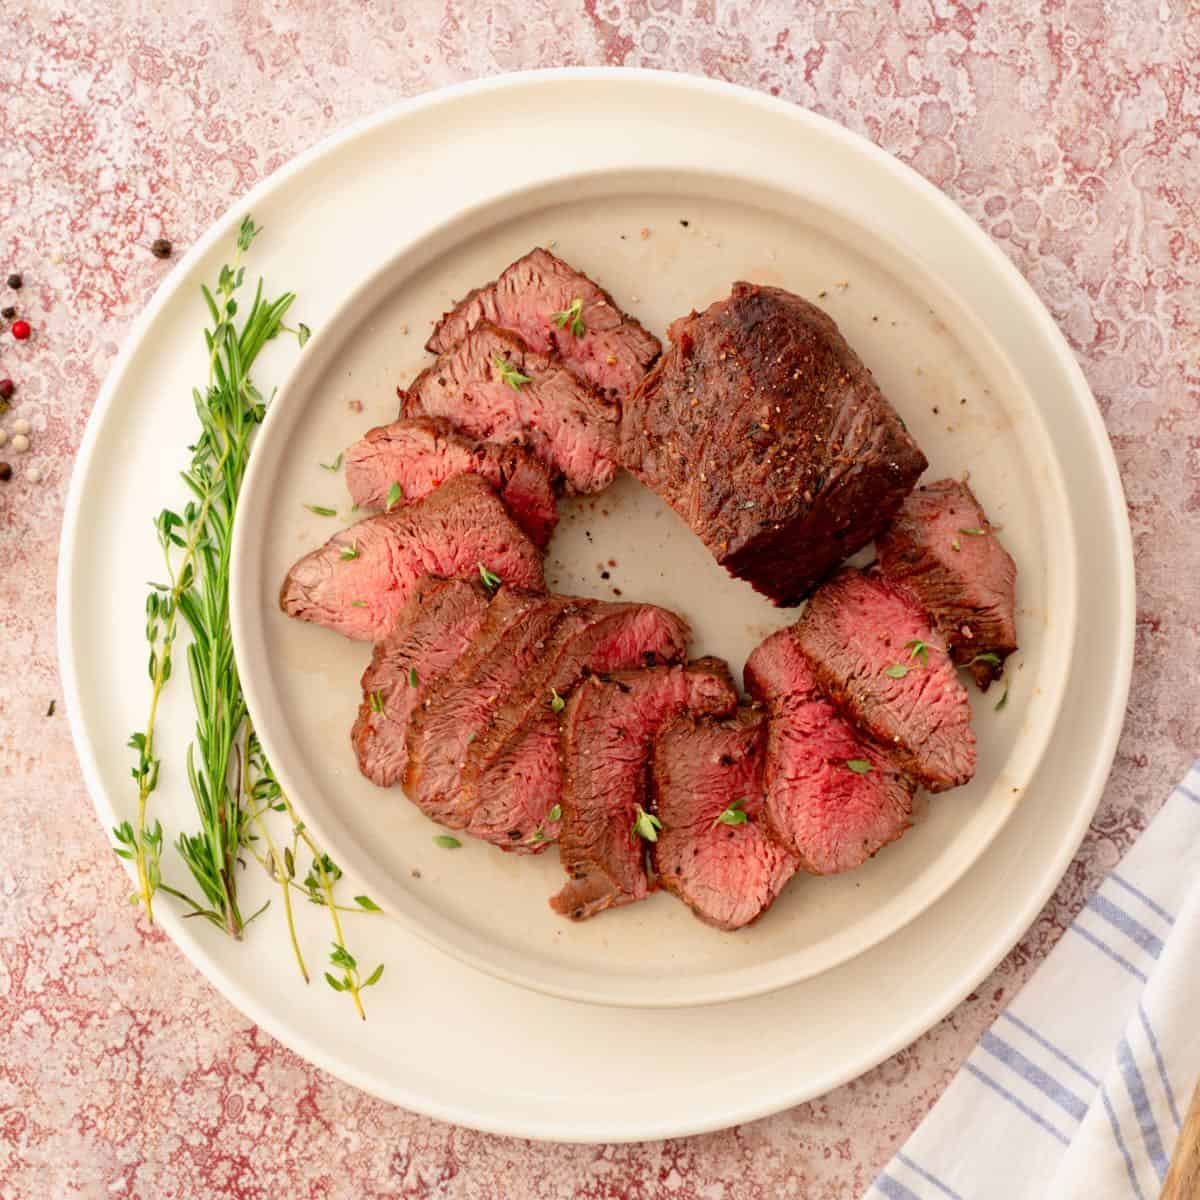 Homemade oven-roasted beef tenderloin steaks served on a white plate, a steak sliced to reveal their pink centers.